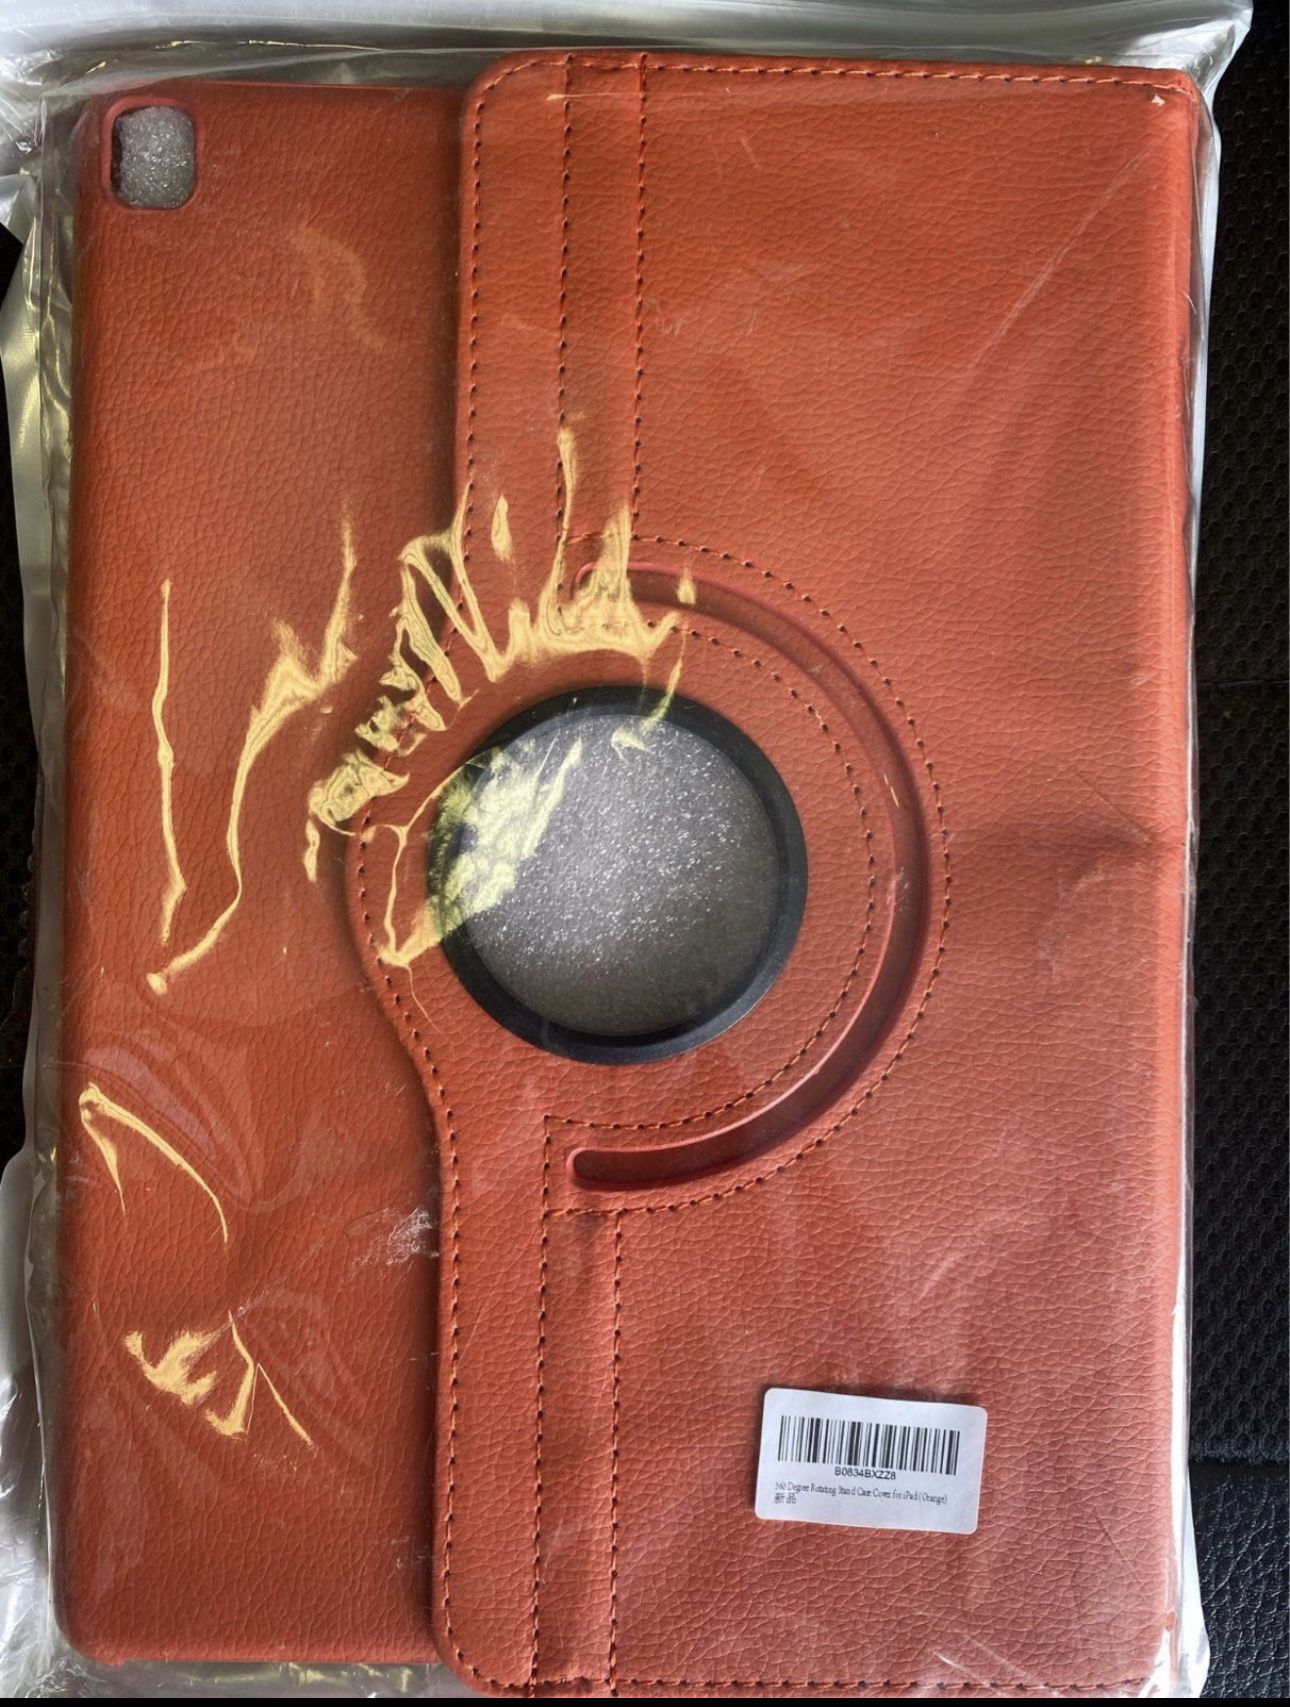 360 Degree ratating stand case cover for ipad orange color. Brand new never used